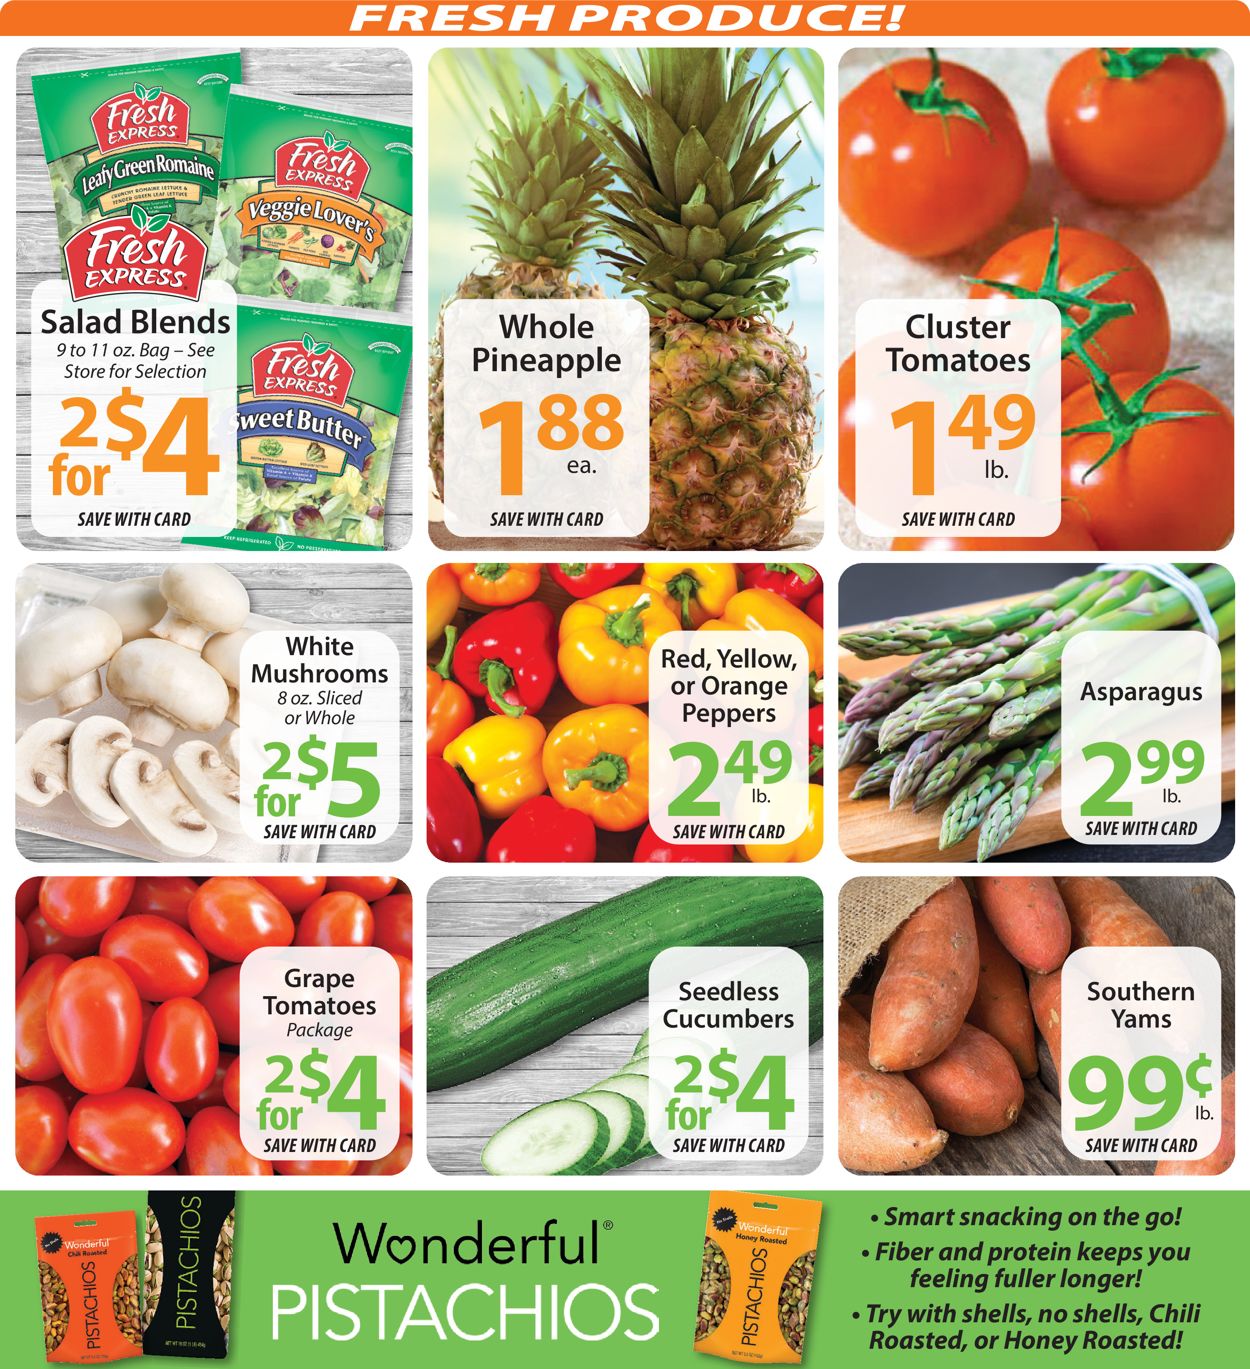 Acme Fresh Market Ad from 12/17/2020